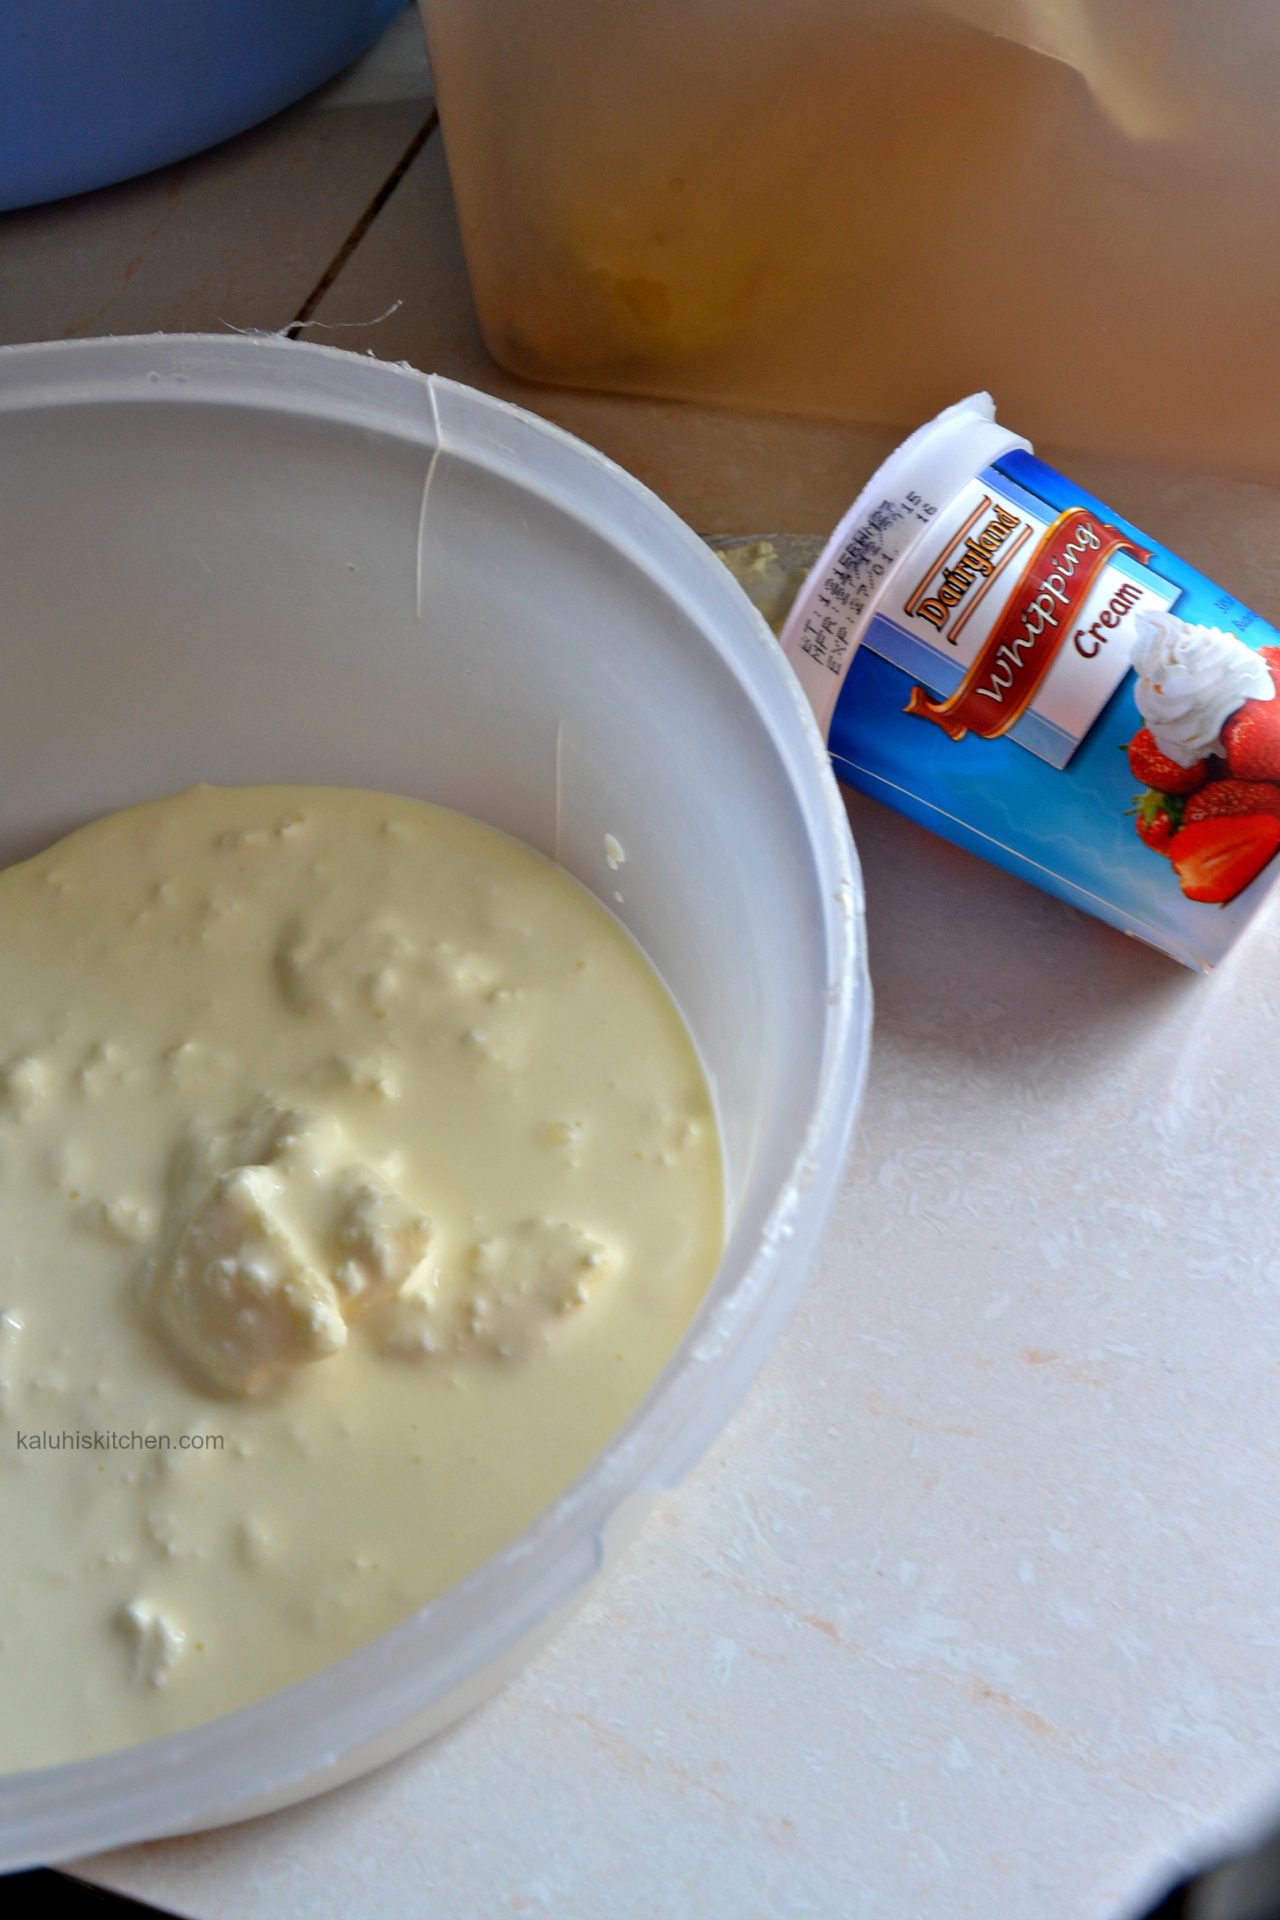 whipping cream forms a creamy base for the mousse and allows easy mixing_kaluhiskitchen.com